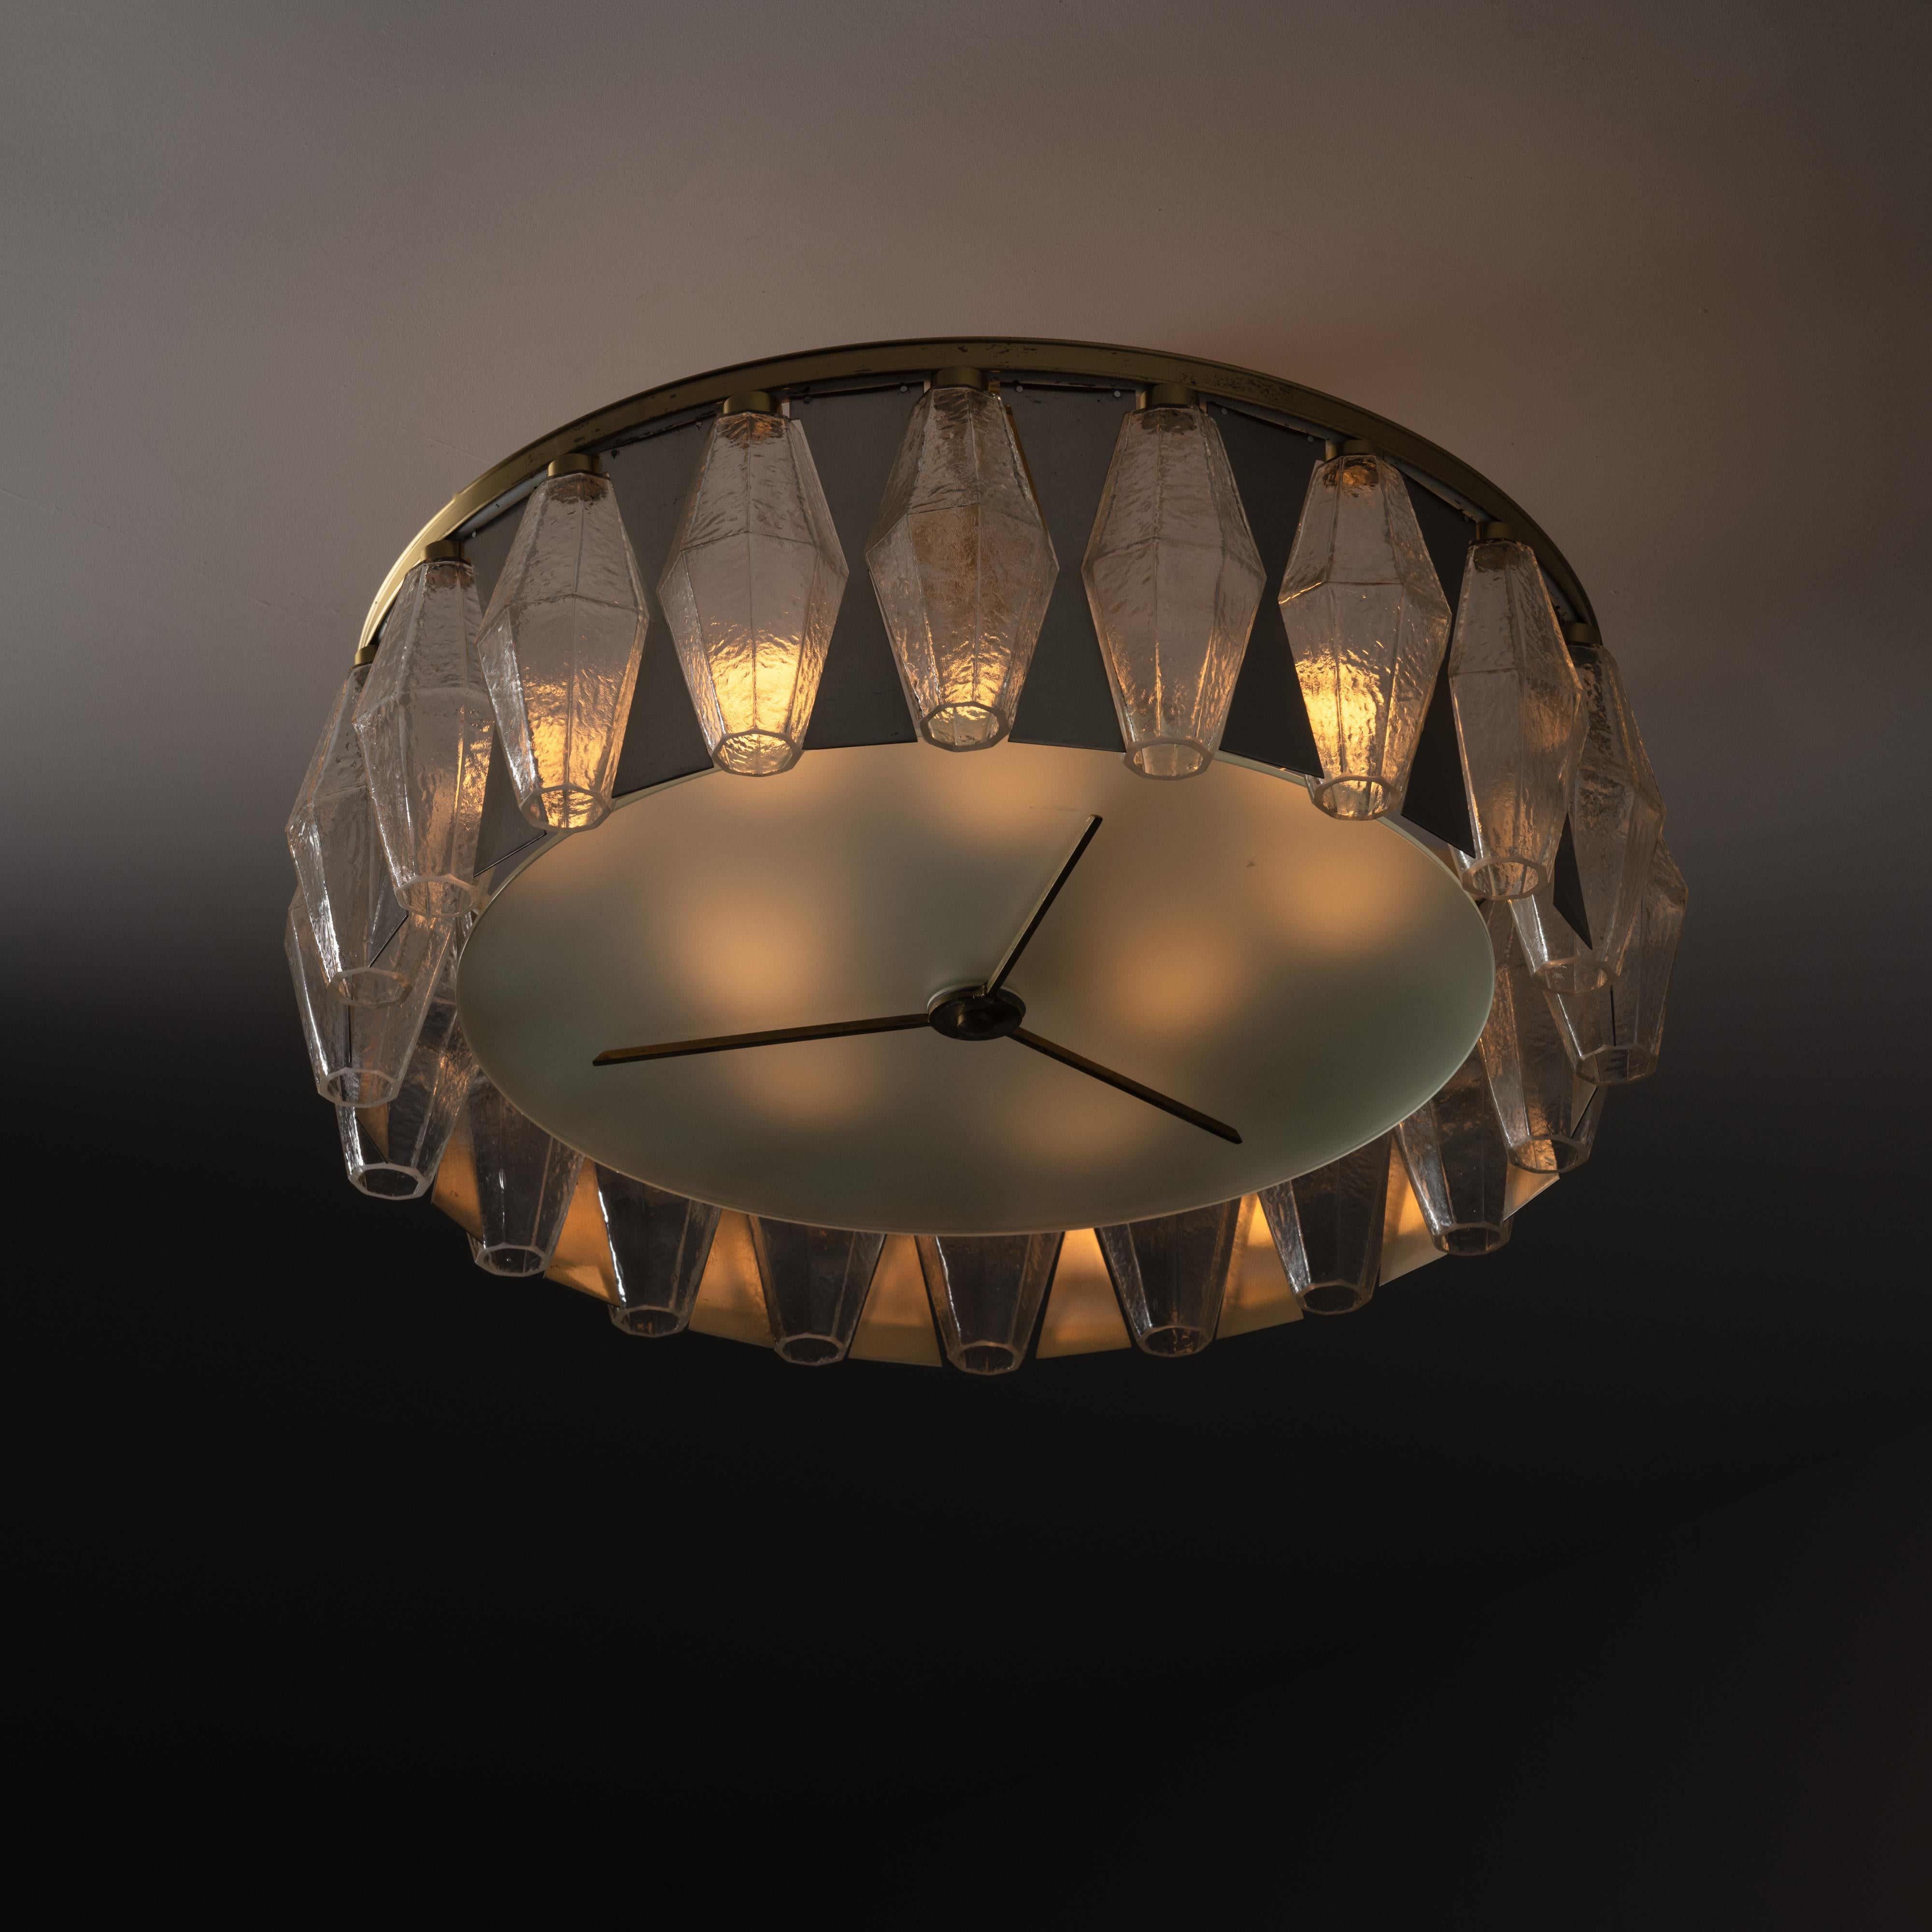 Rare Flush Mount by Carlo Scarpa for Venini. Designed and manufactured in Italy, circa 1960. Incredible circular flush mount with individual glass diffusion prisms separated by flat aluminum spacers. The flush mount features brass frame detailing,